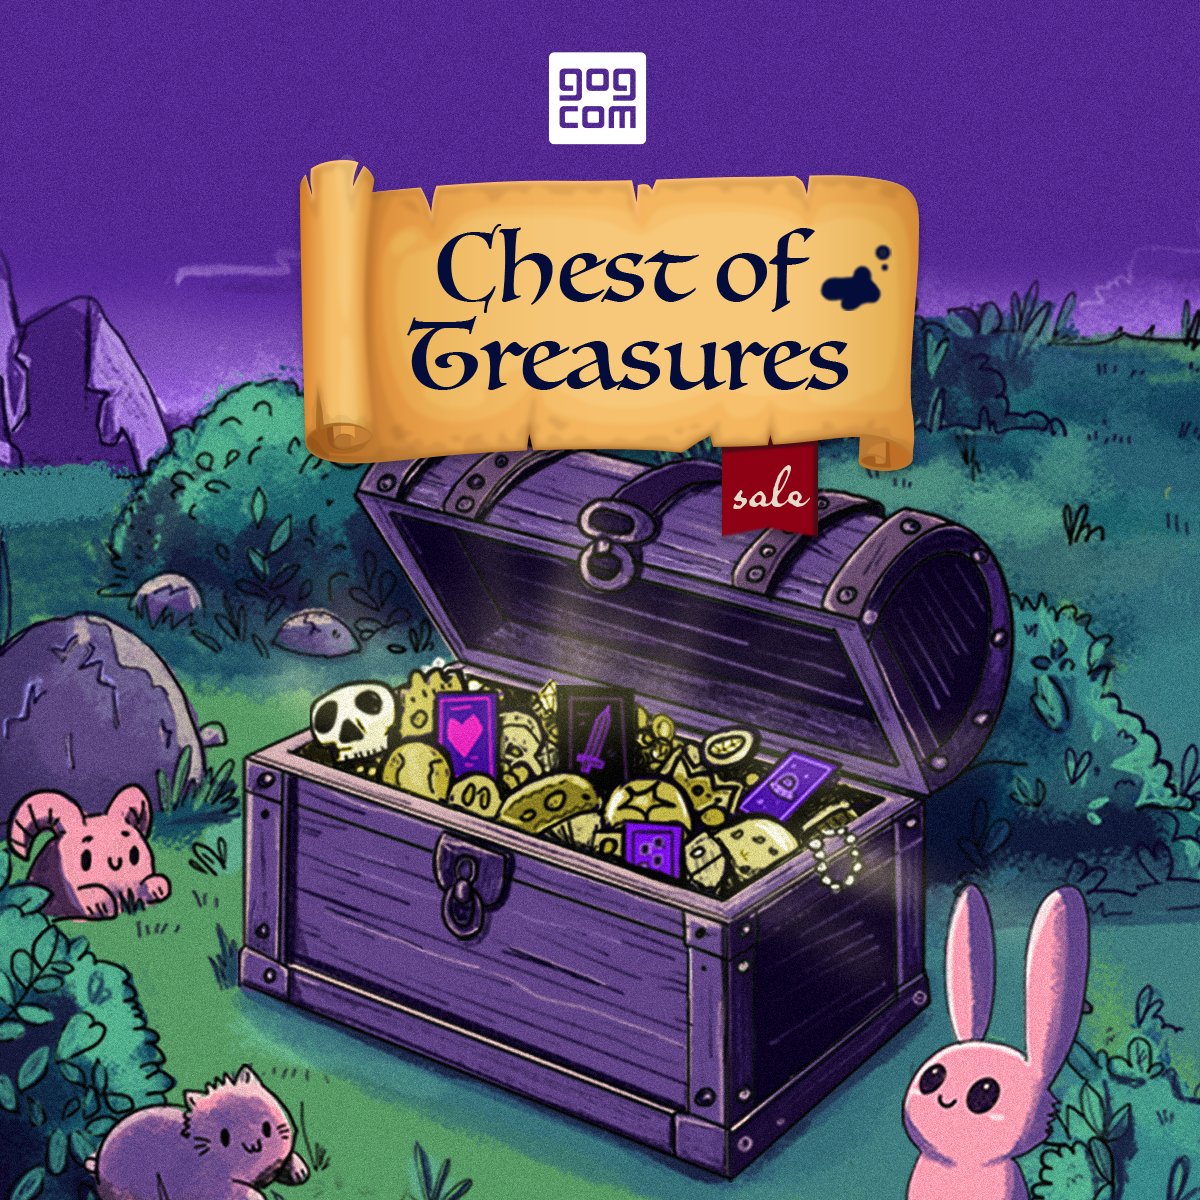 you just found a chest full of games that can be fully yours (because they’re DRM-free) shop away 👉 bit.ly/GOGtreasure